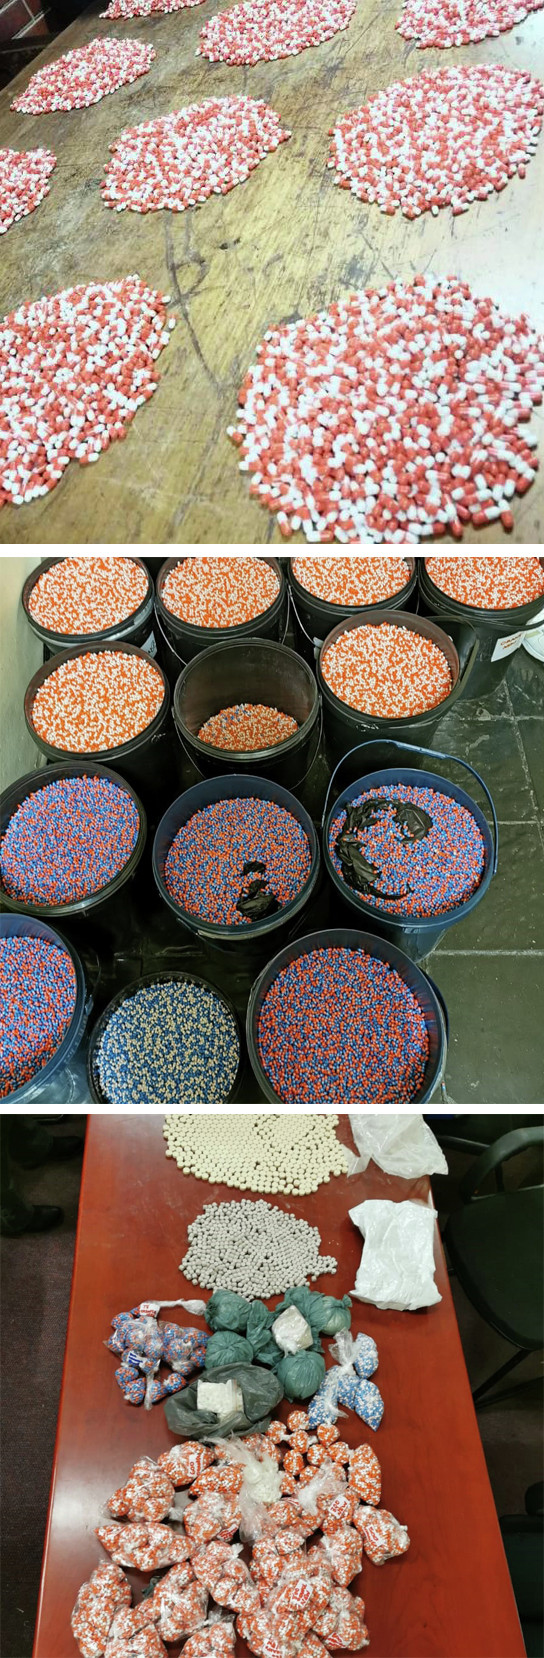 Evidence gathered by police in Durban in a July 2019 raid that demonstrates the assembly-line production approach and sheer scale of producing heroin capsules.
